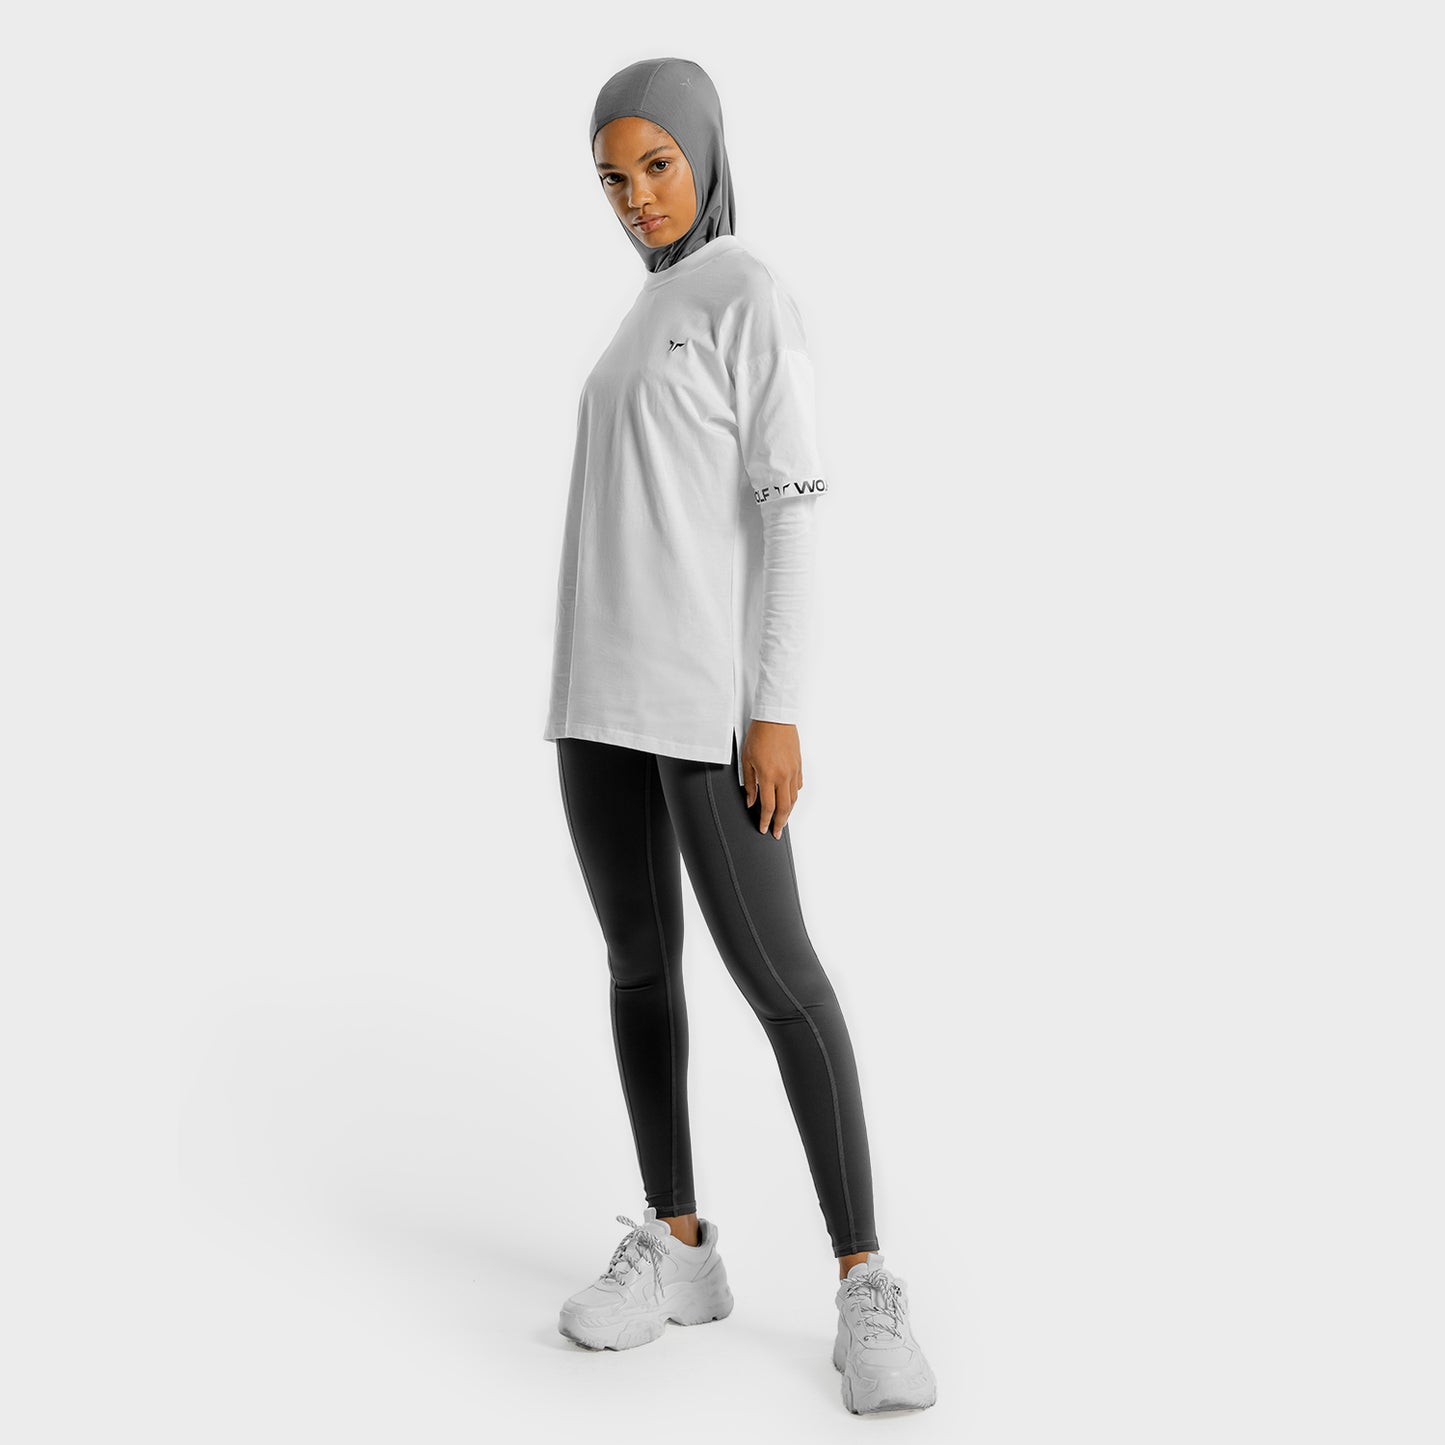 squatwolf-gym-hijab-for-women-noor-performance-hijab-grey-workout-clothes